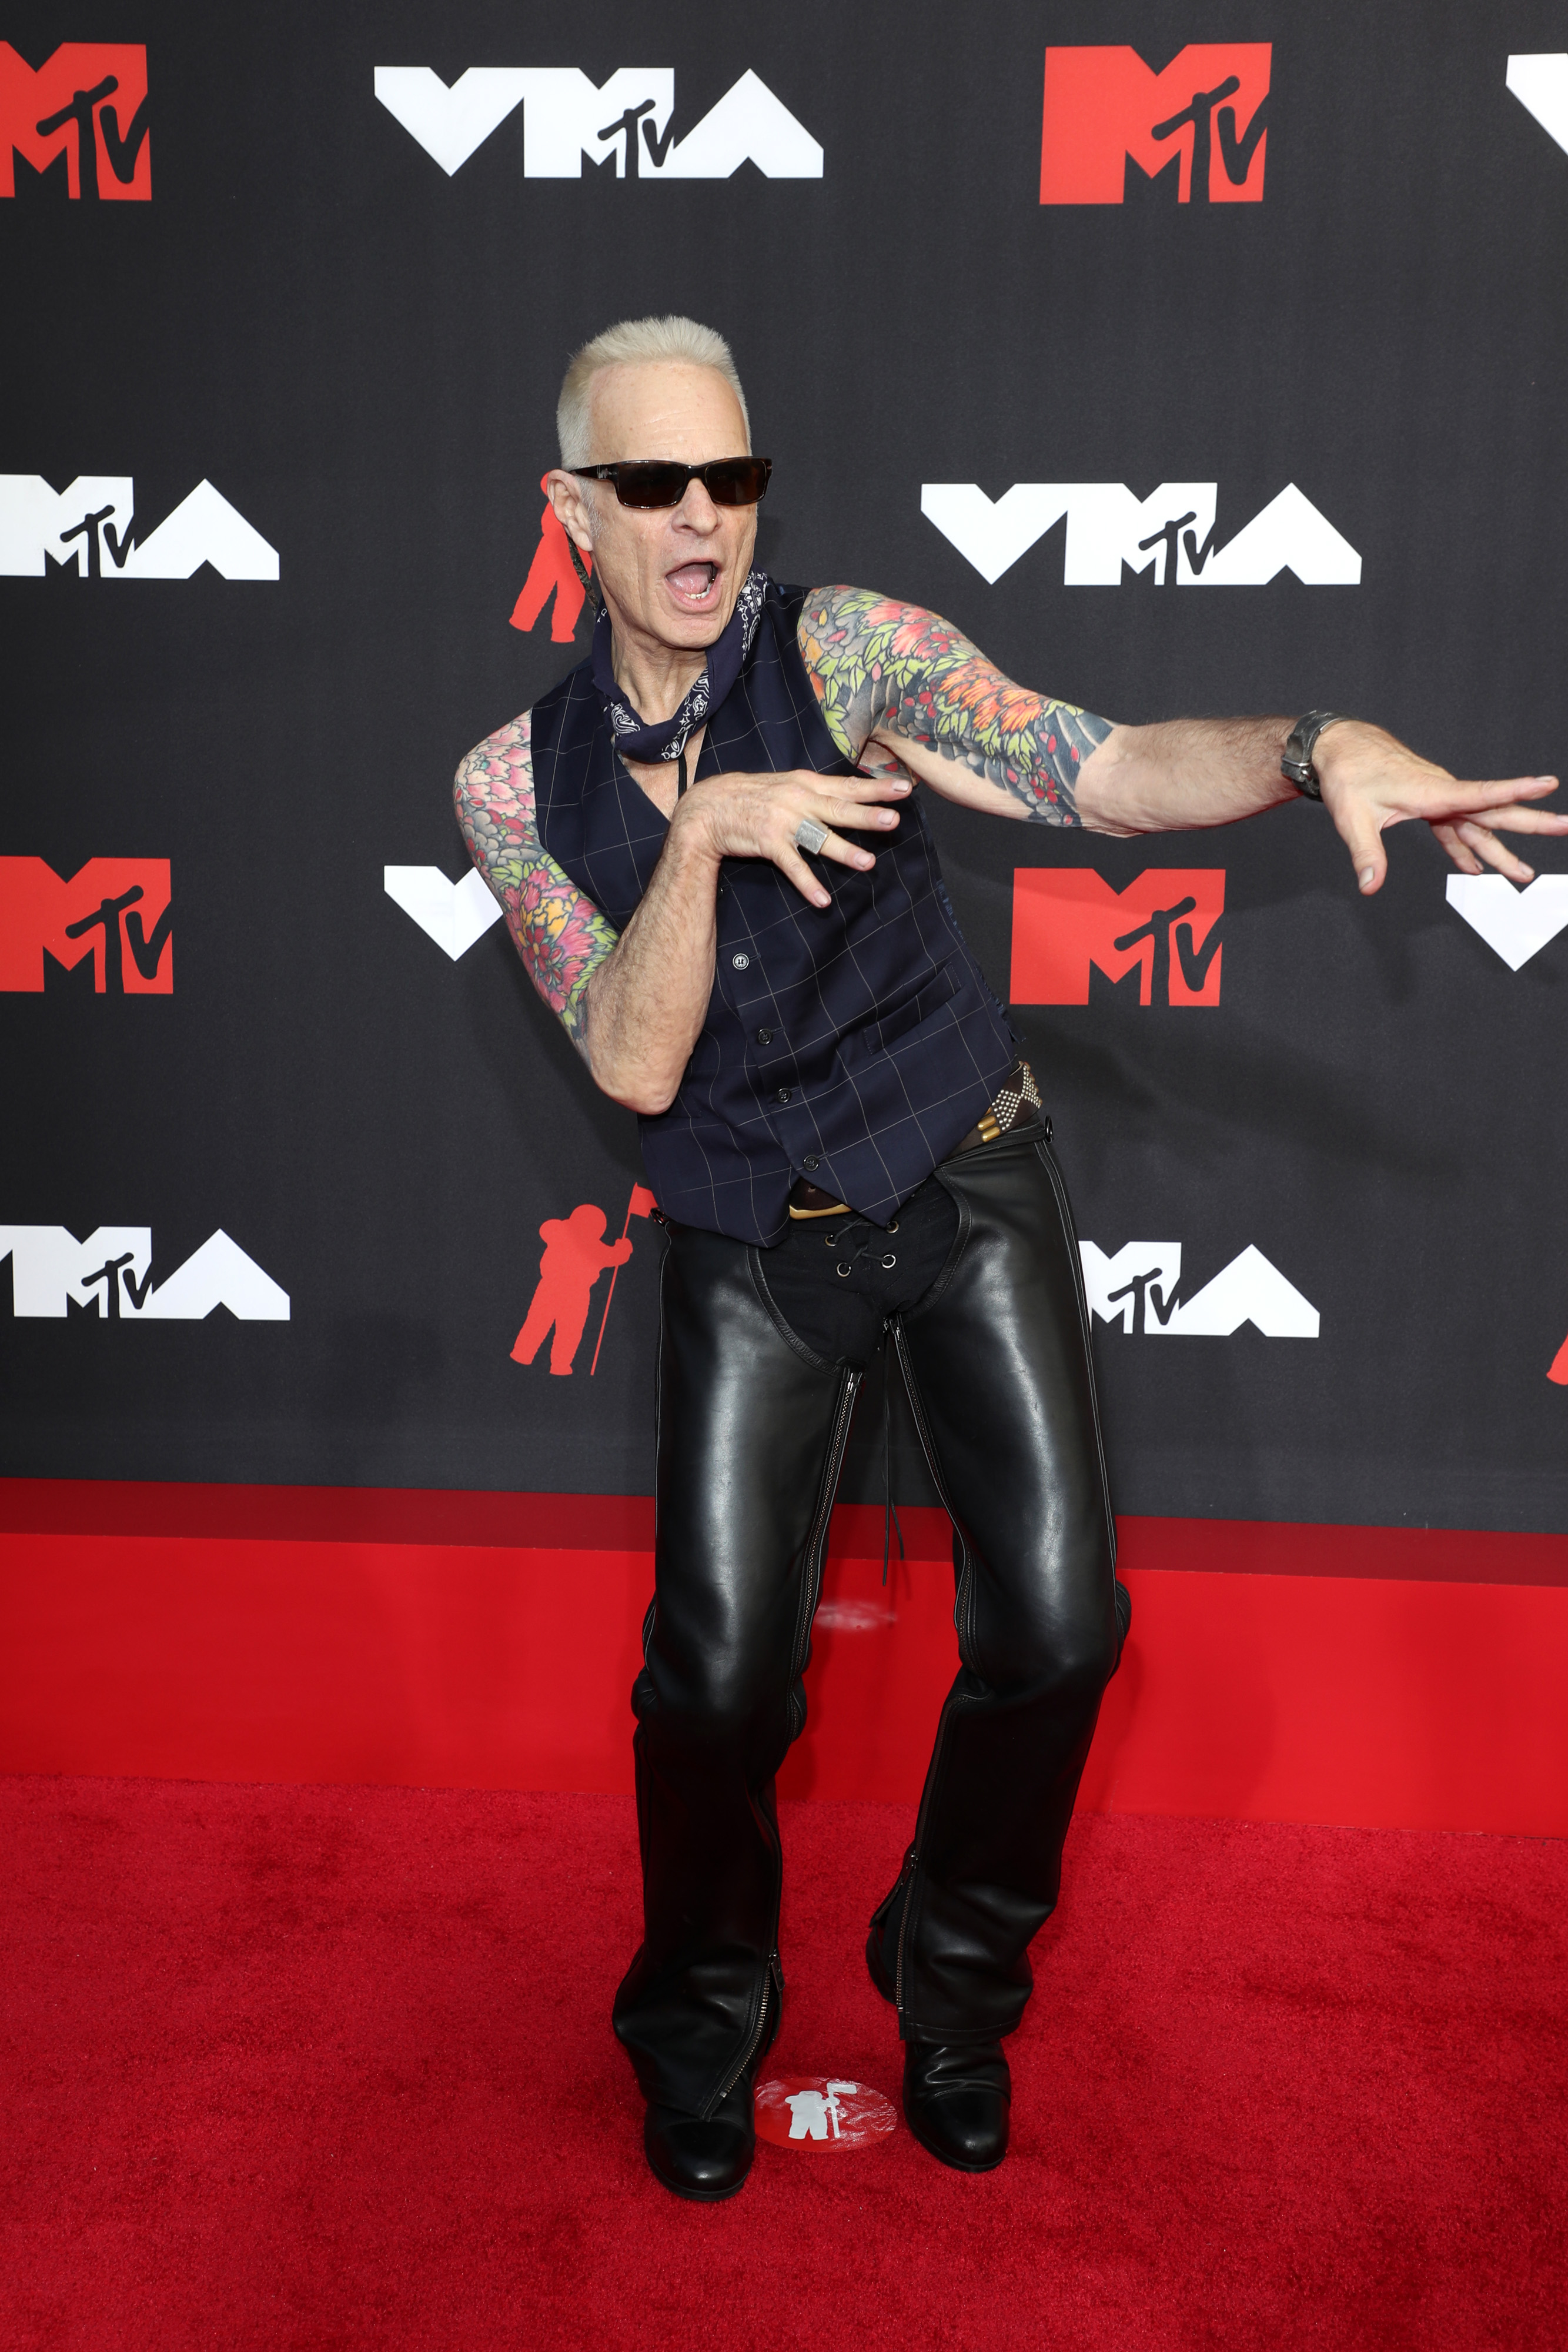 David Lee Roth on the red carpet